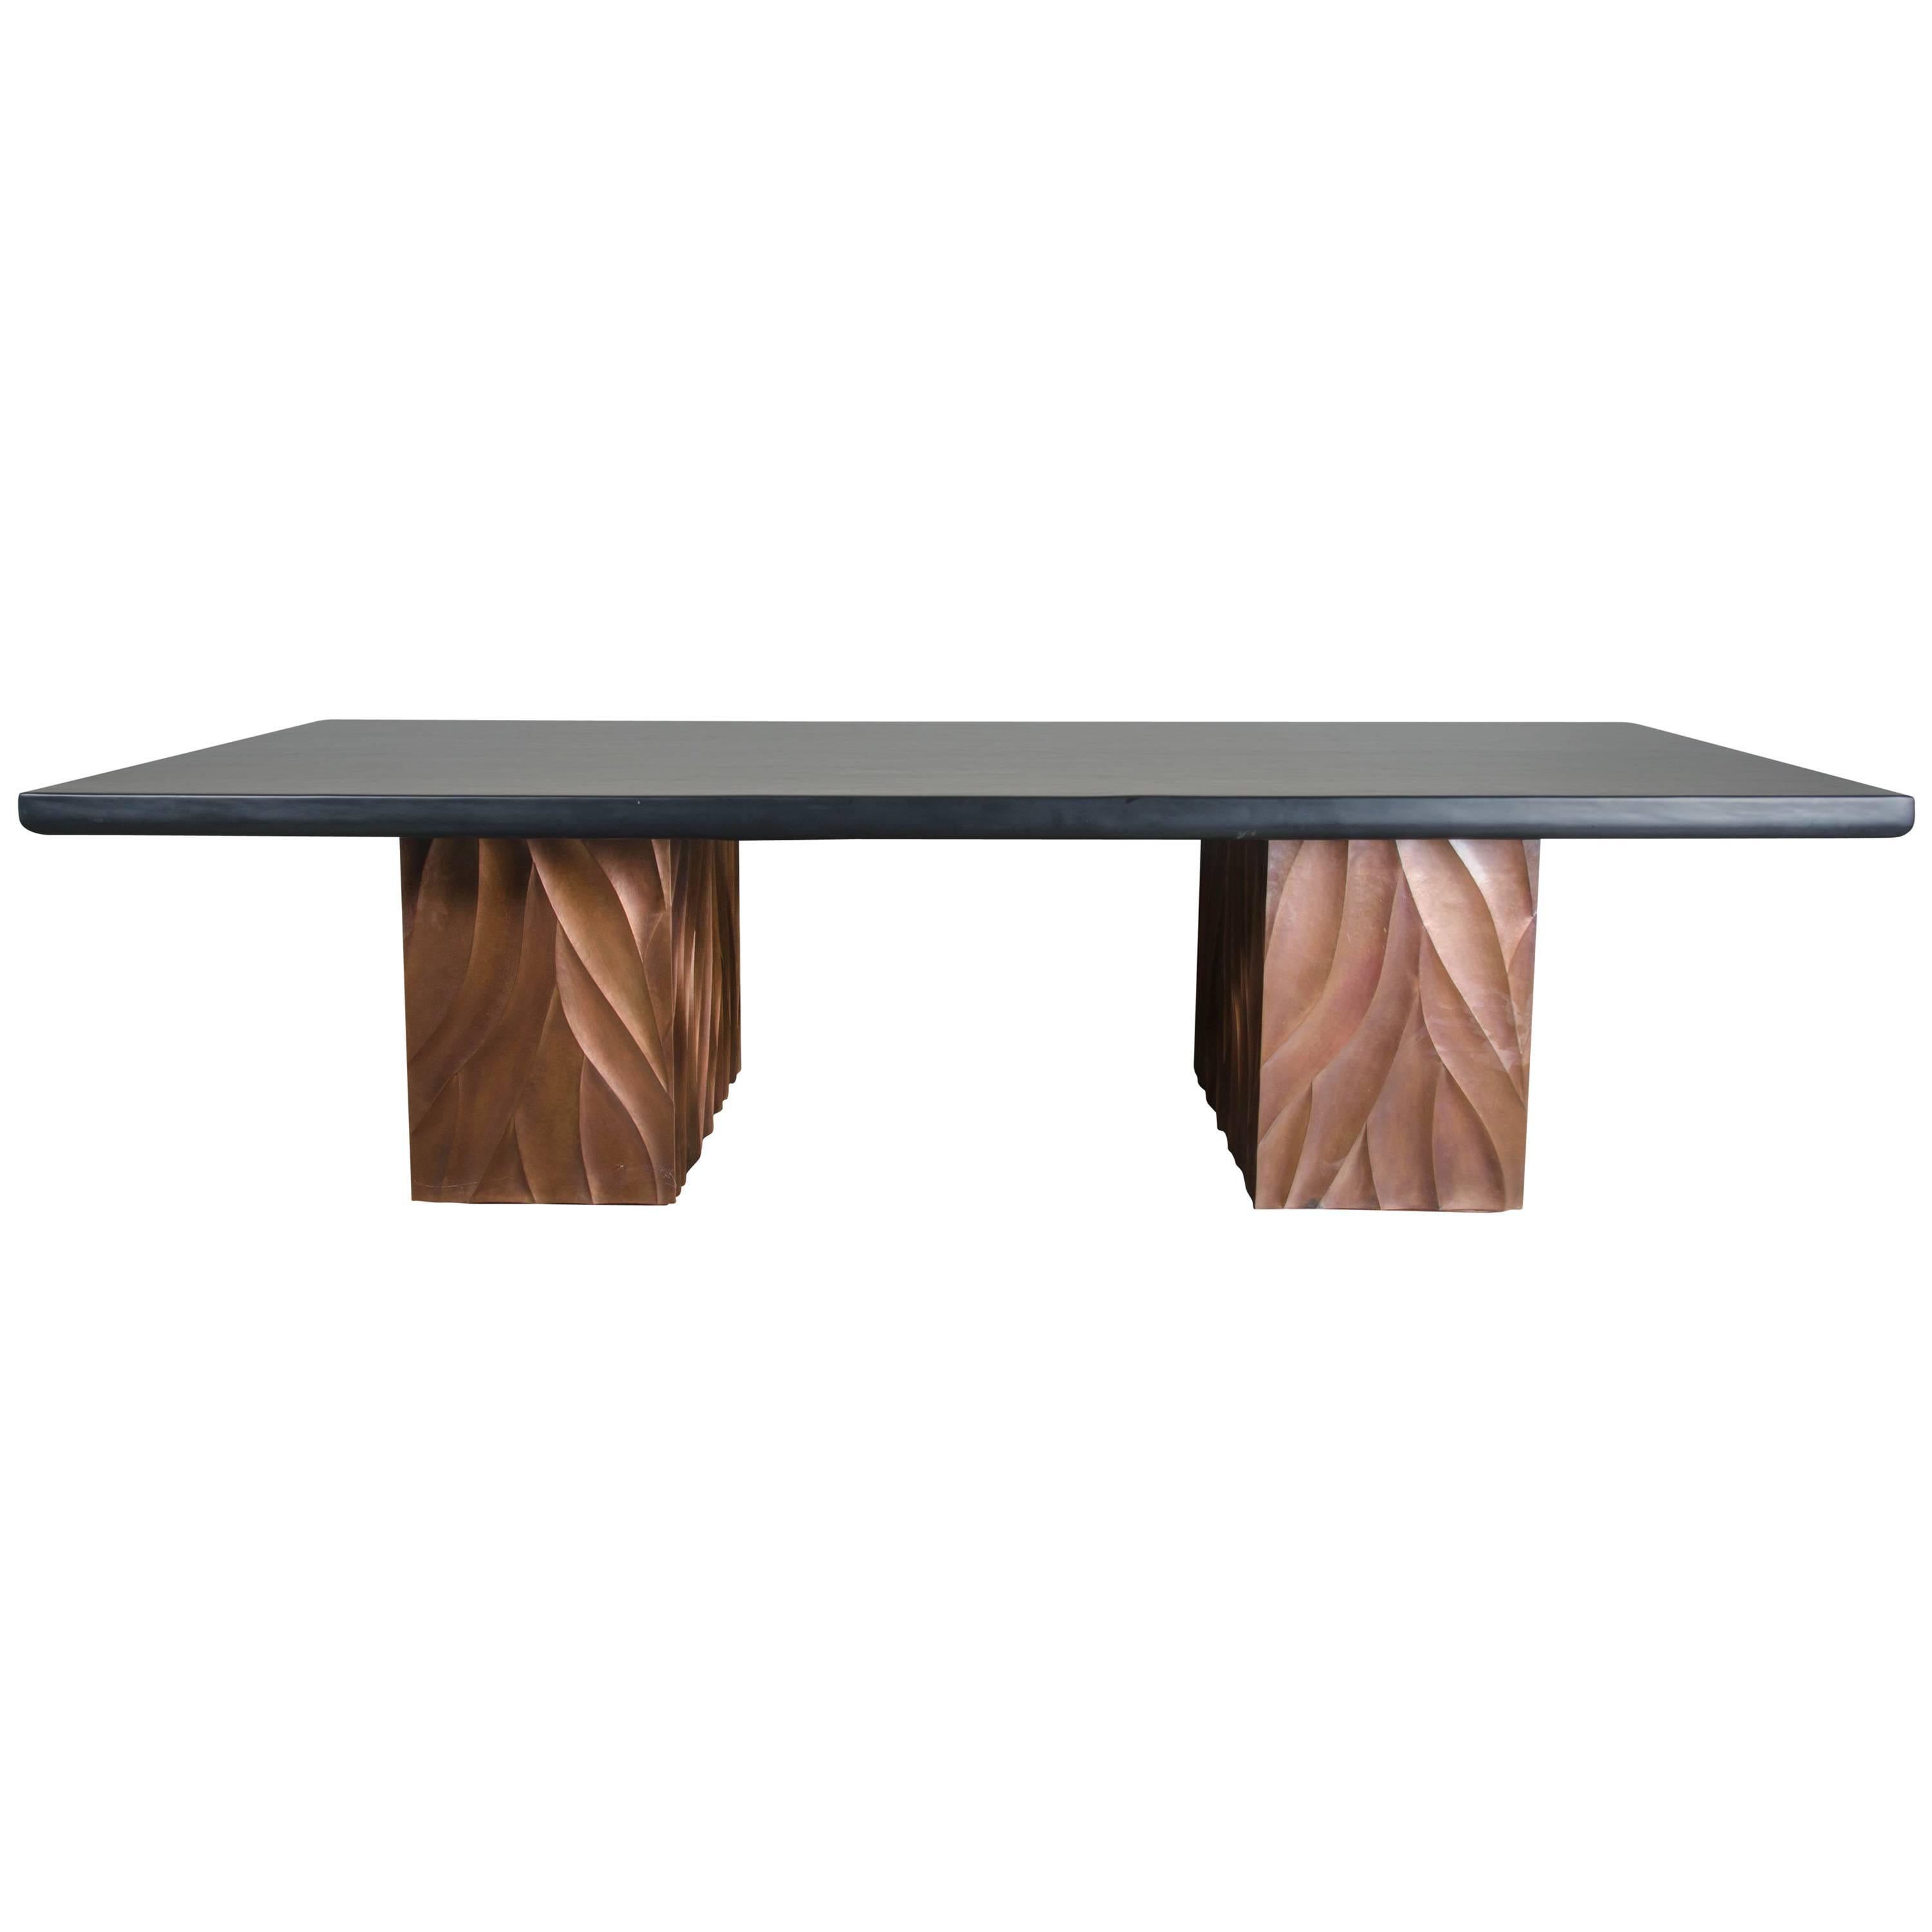 Za Xian Dining Table Base ‘Pair’, Antique Copper by Robert Kuo, Limited Edition